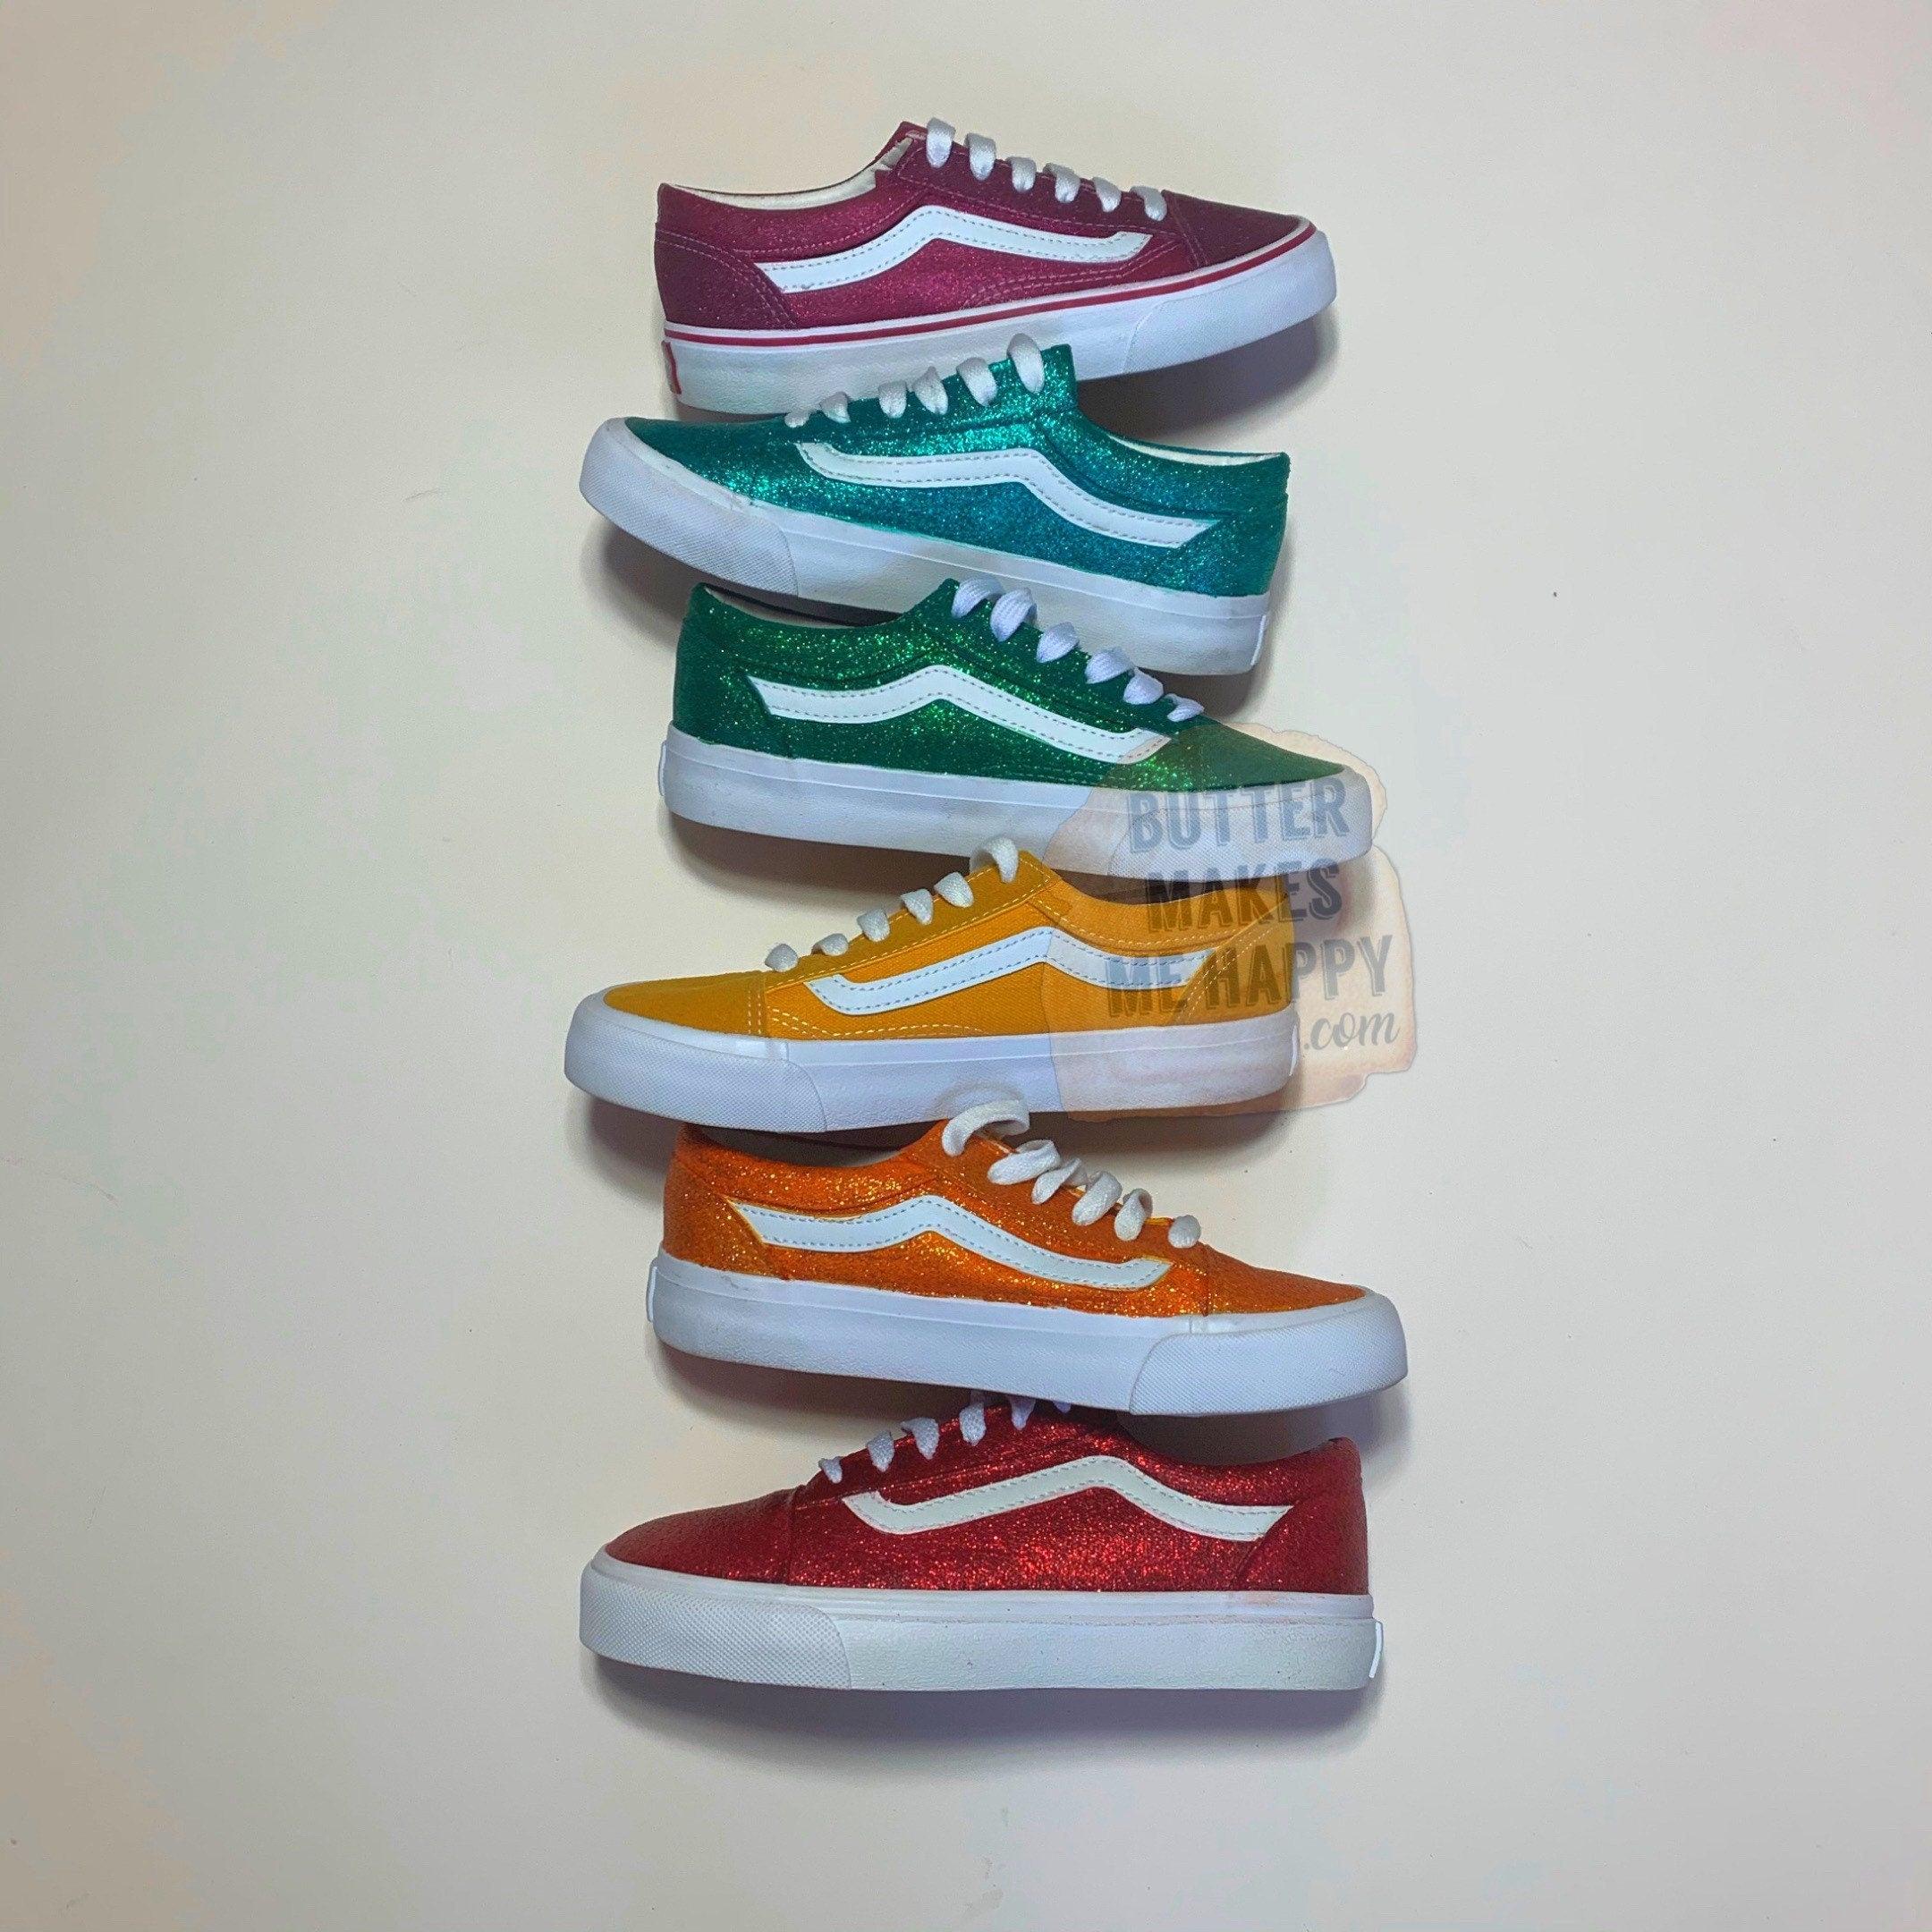 Pick Your Color - Sparkly Skool ButterMakesMeHappy Vans – Glitter Old